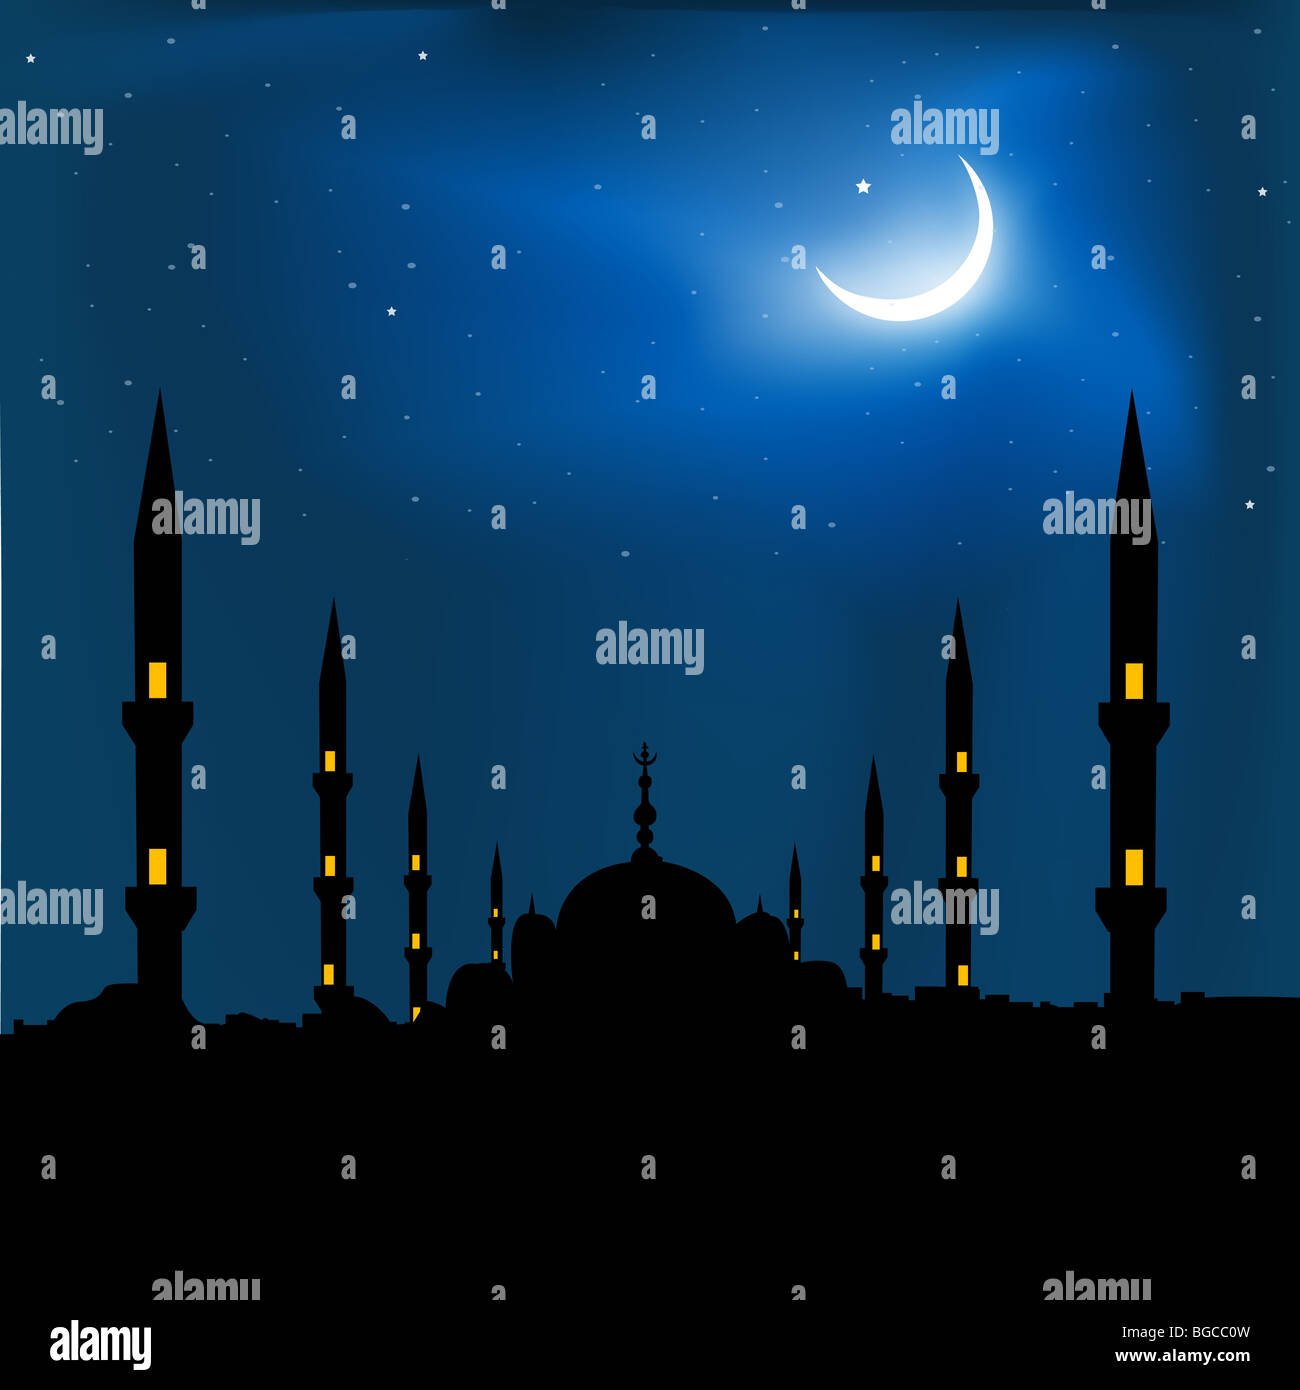 silhouette of a mosque with crescent shape moon Stock Photo